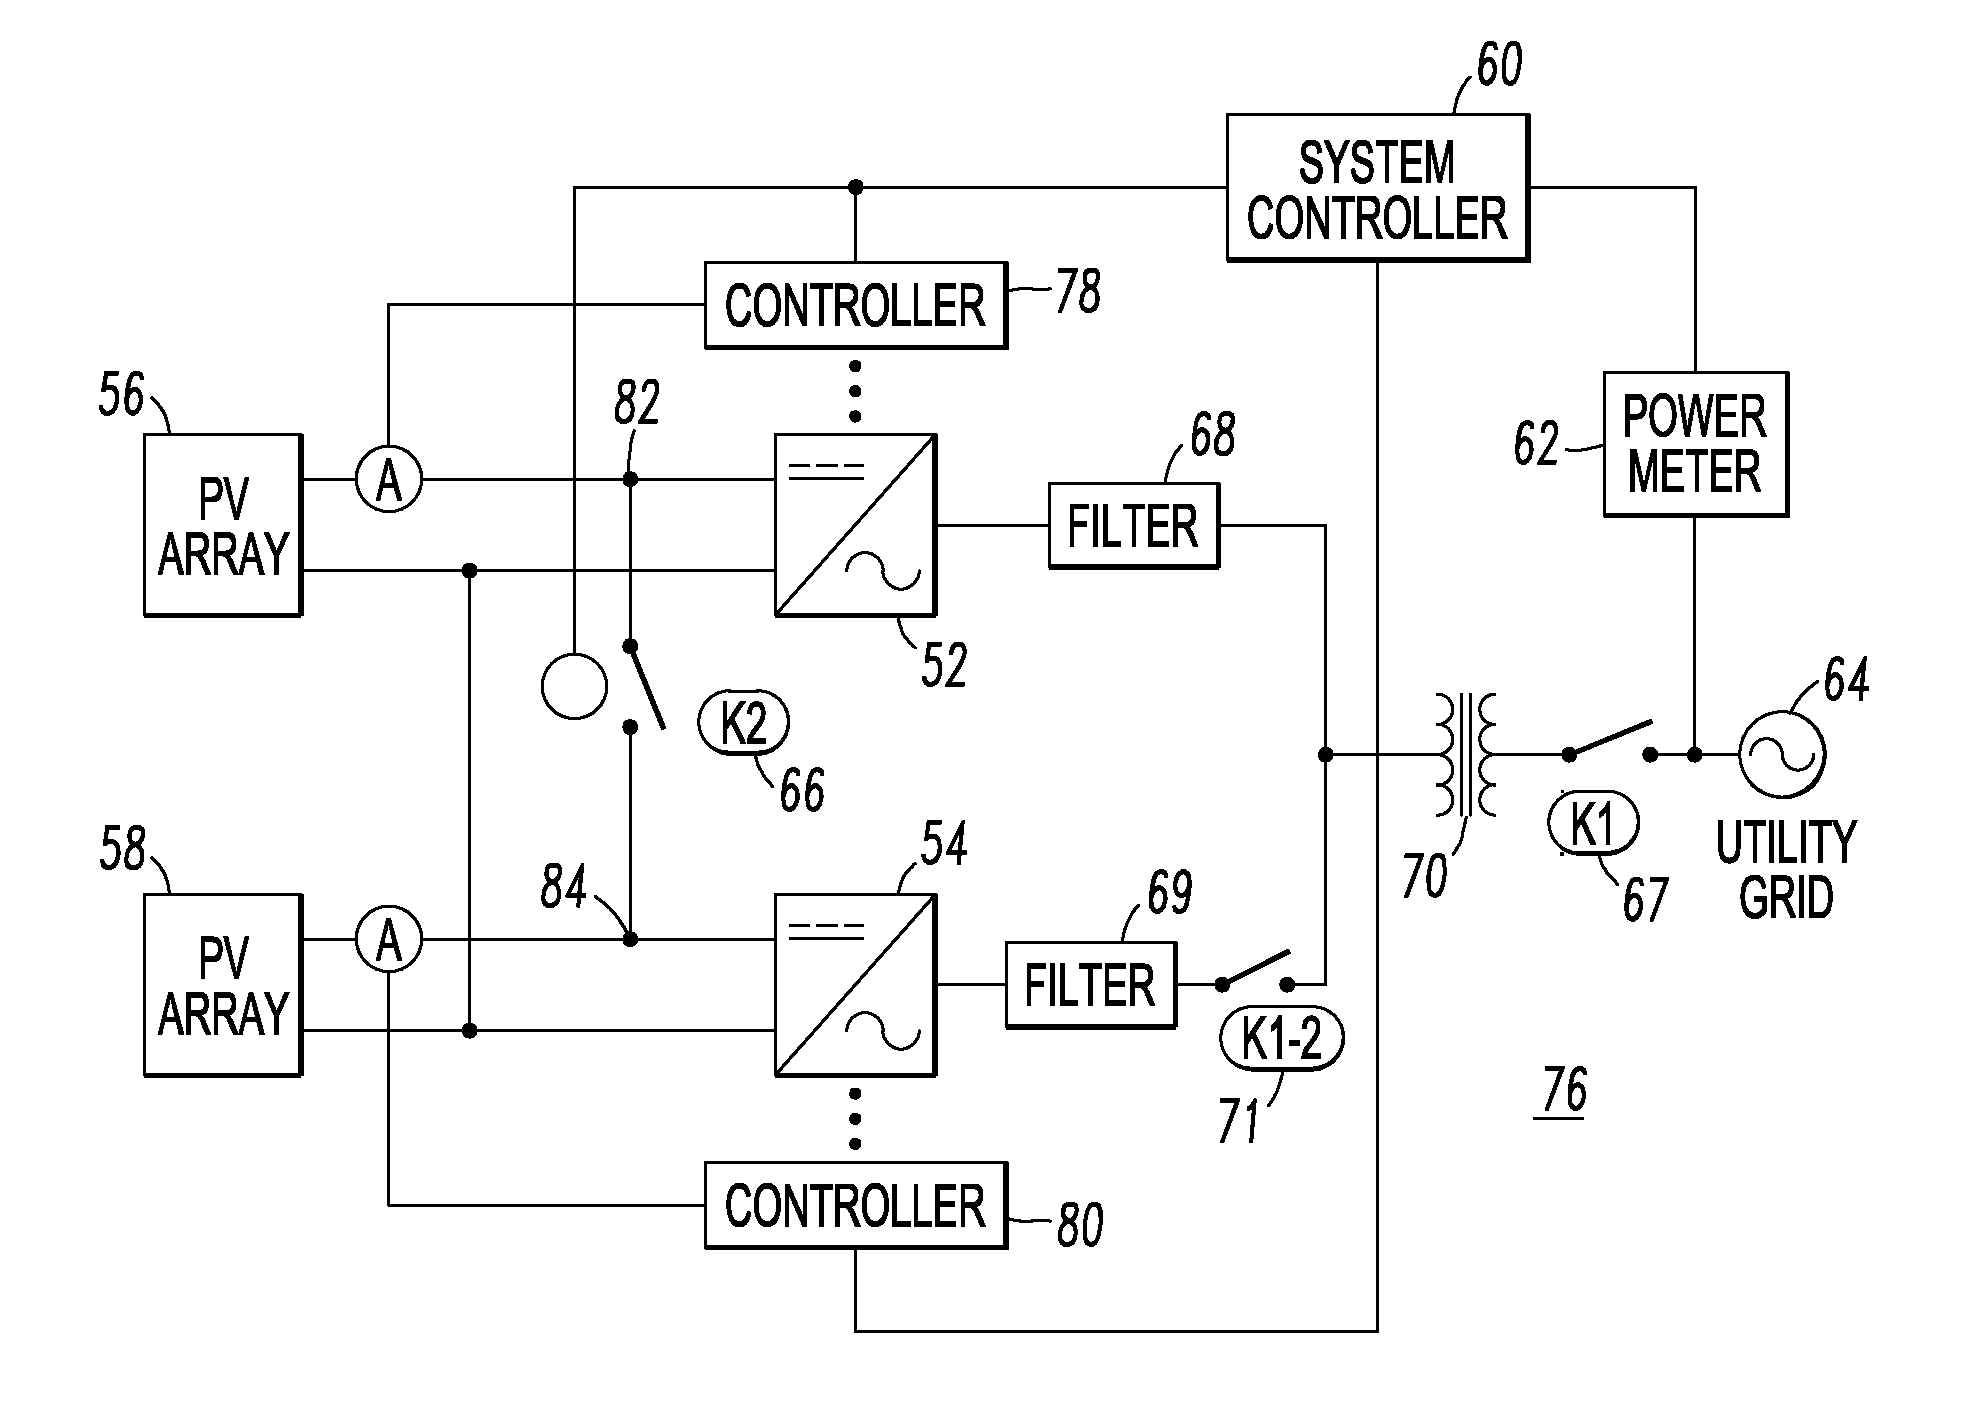 Power conversion system and method providing maximum efficiency of power conversion for a photovoltaic system, and photovoltaic system employing a photovoltaic array and an energy storage device